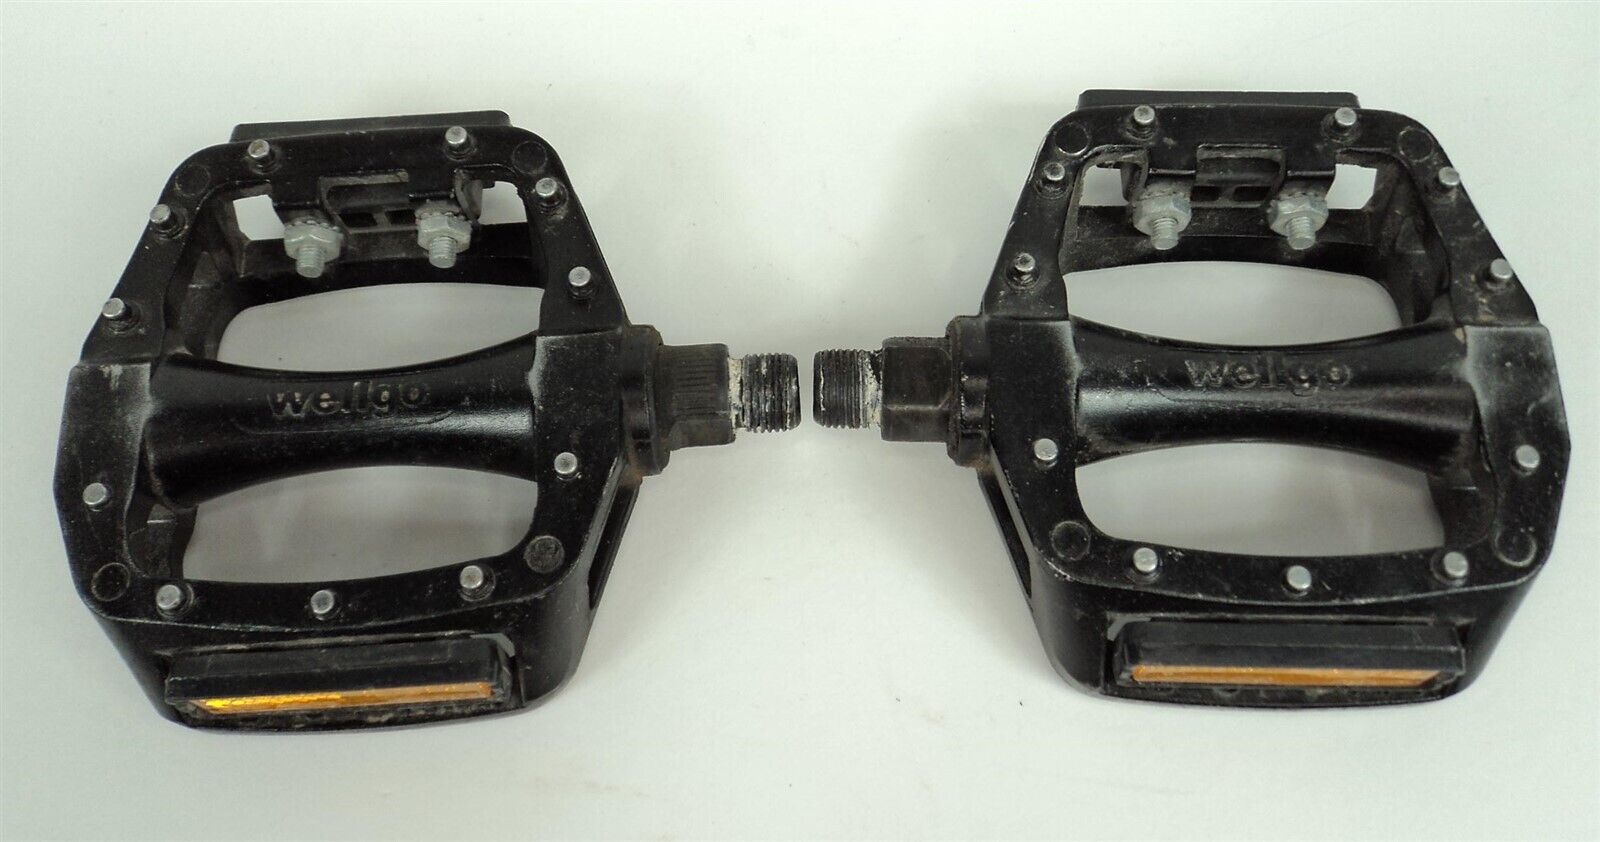 Primary image for Wellgo Bicycle 1/2" Axle Pedals w/ Reflectors 